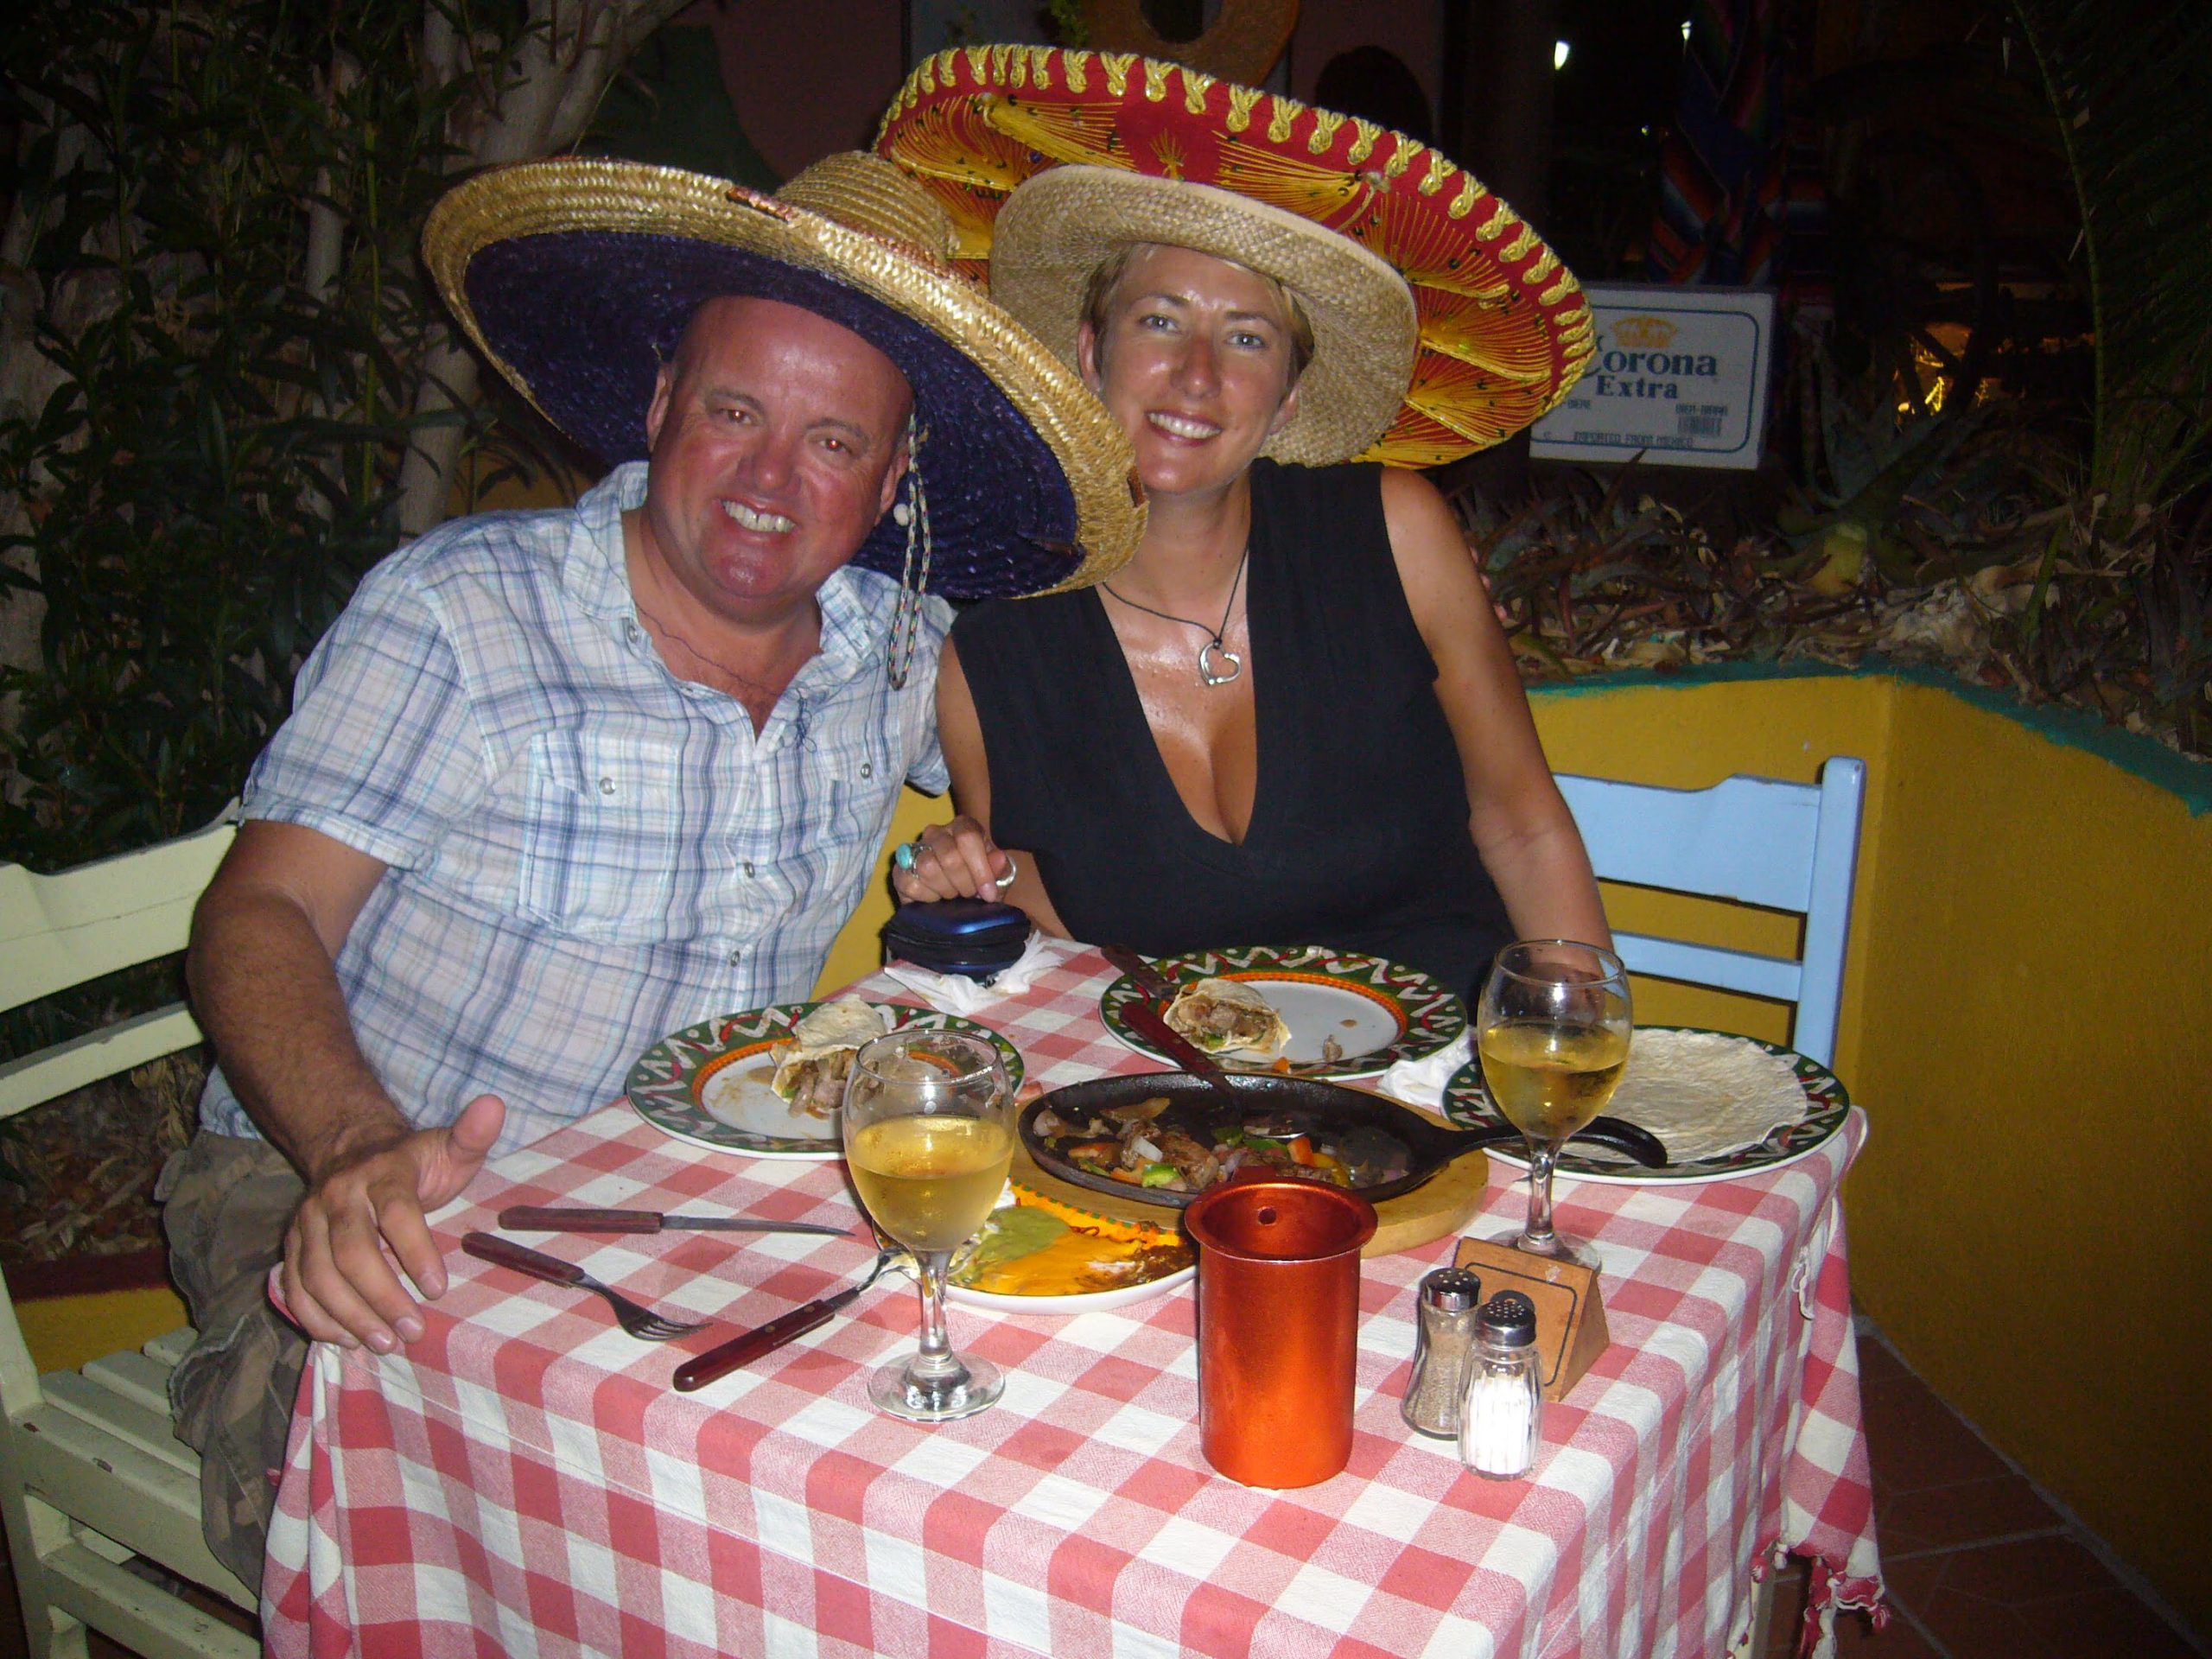 A smiling couple sitting at a dinner table covered in a checked cloth wearing Sumbreros